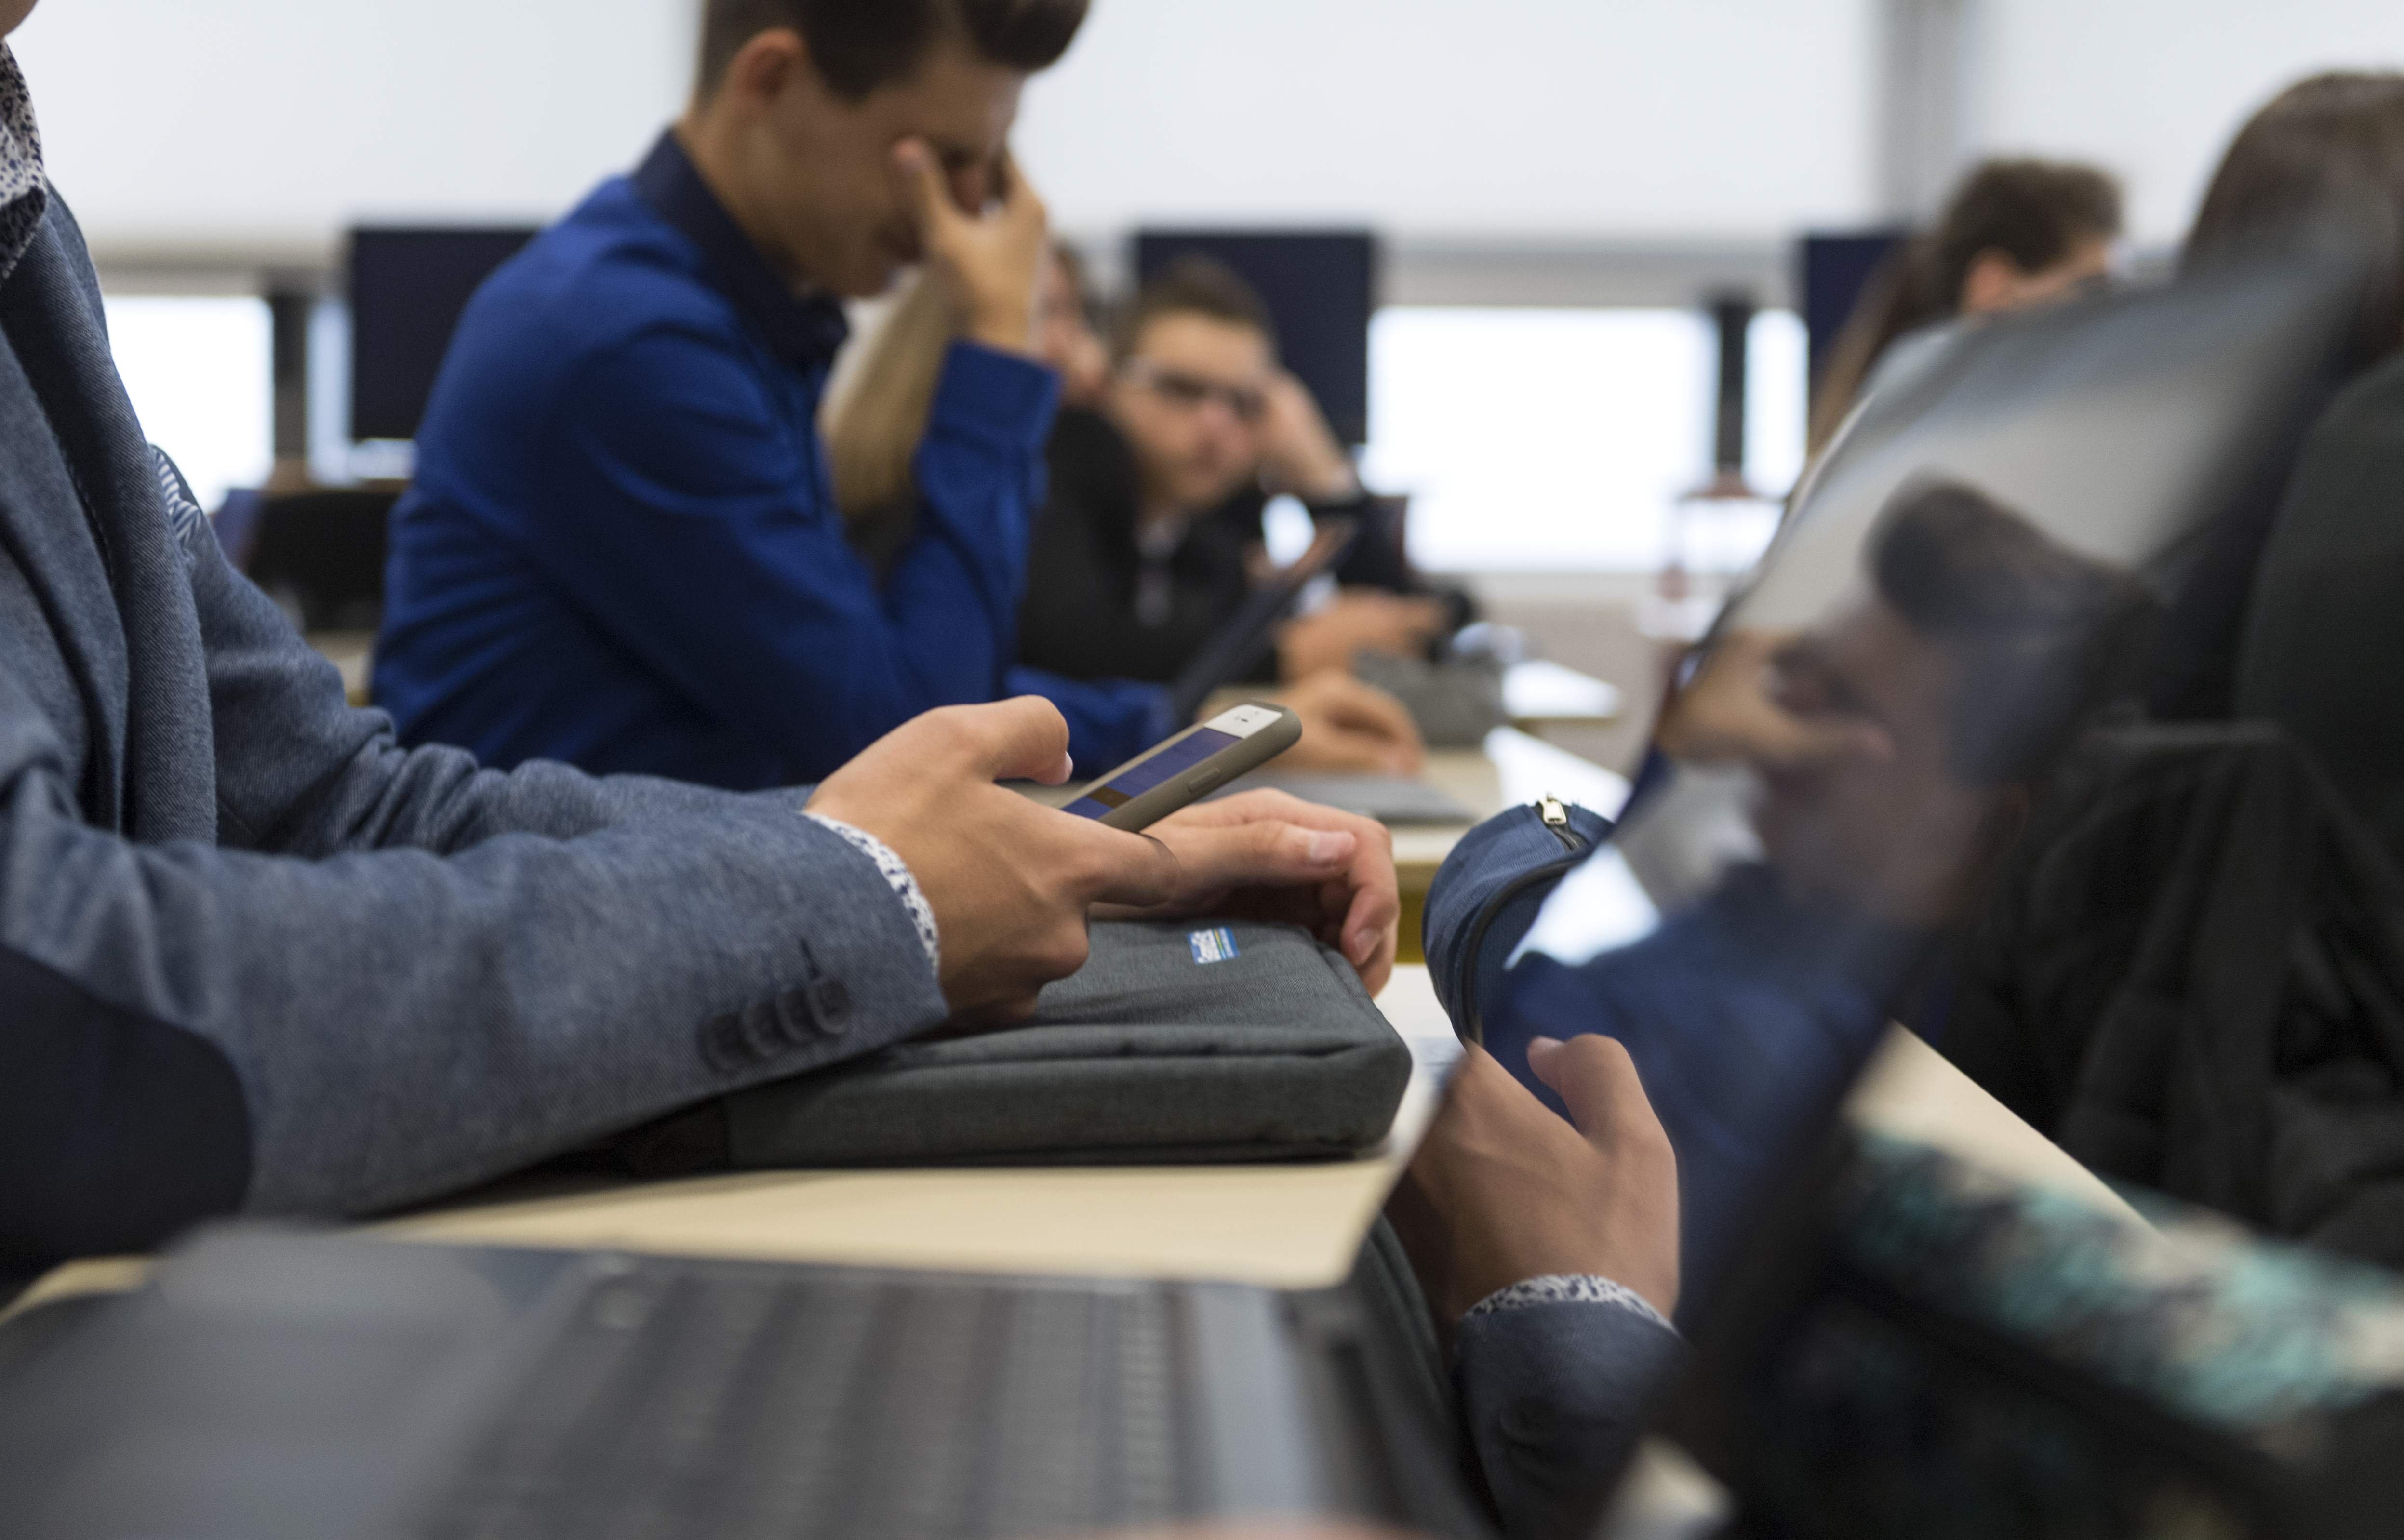 In this photograph taken on September 26, 2017, high school students use smartphones and tablet computers at the vocational school in Bischwiller, eastern France. Since the beginning of the school year in eastern France some 31,000 high school pupils have replaced their traditional textbooks by computers and tablets , a move popular with students but opinion is divided among teachers and parents. / AFP PHOTO / PATRICK HERTZOGPATRICK HERTZOG/AFP/Getty Images